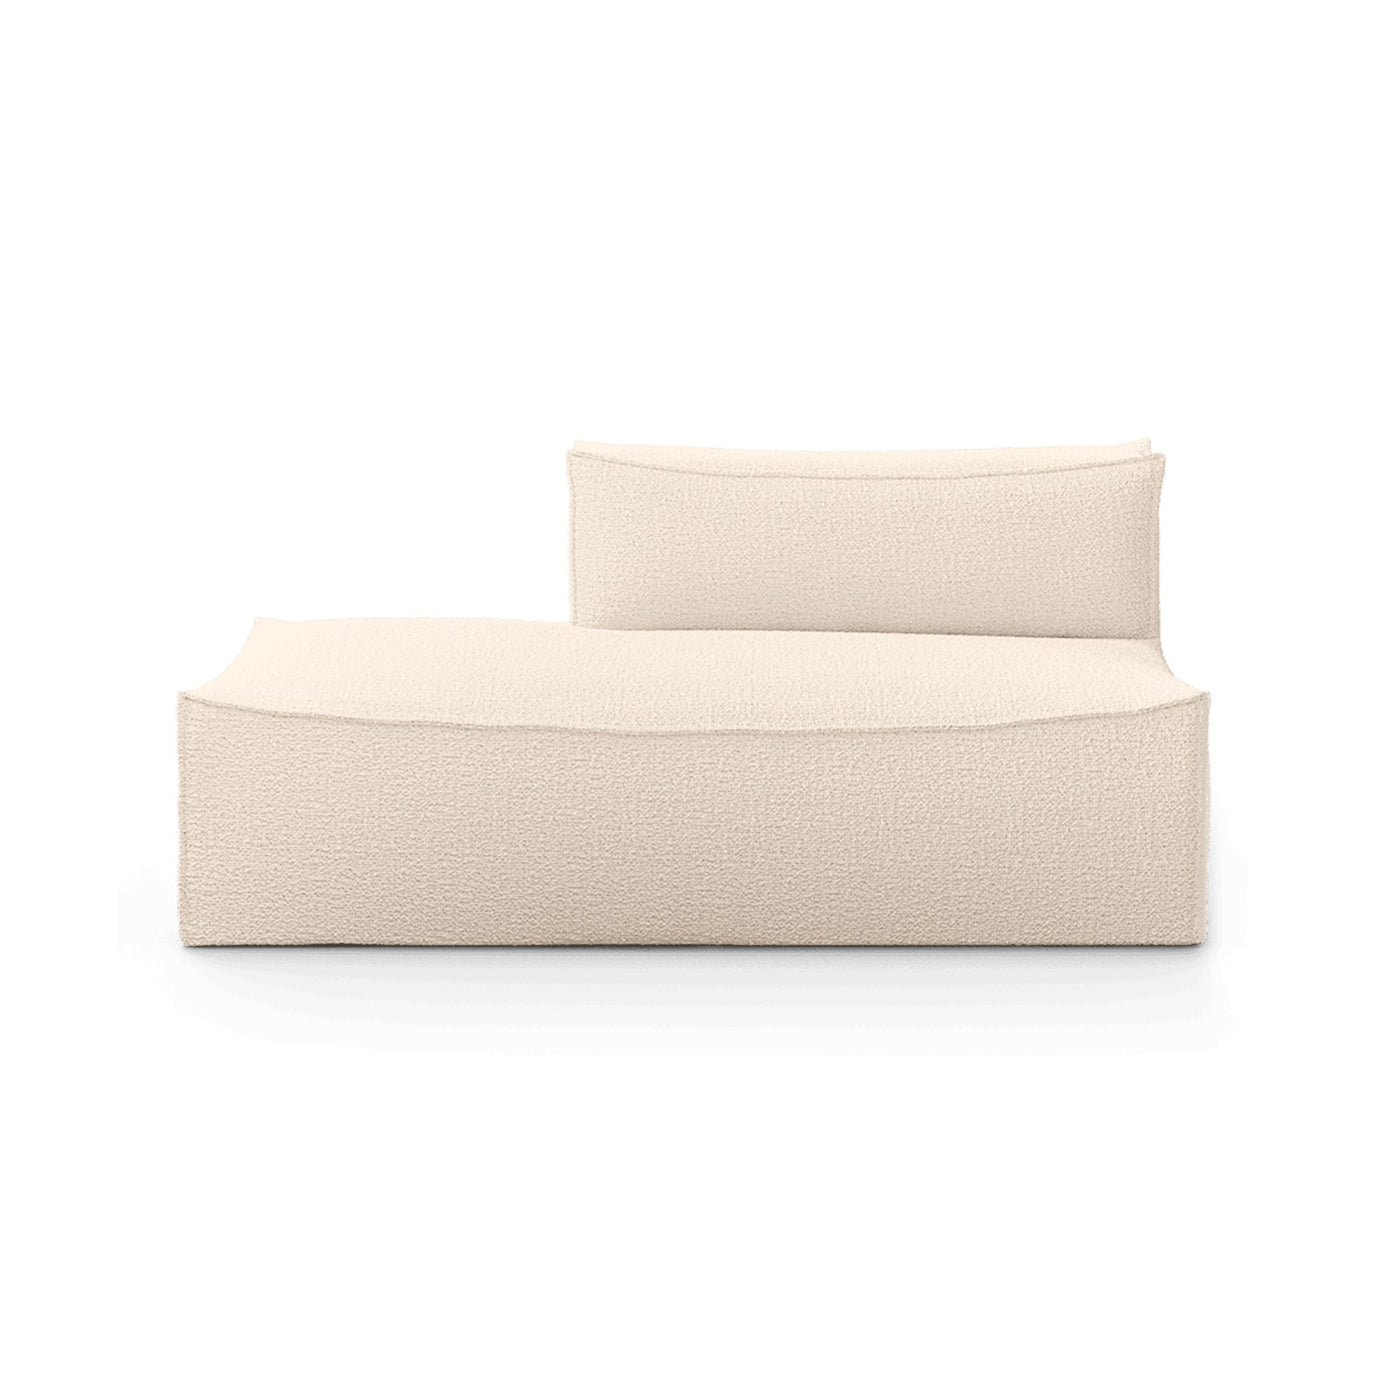 Ferm Living Catena Modular Series. Shop online at someday designs. L300 open end left in #colour_off-white-wool-boucle